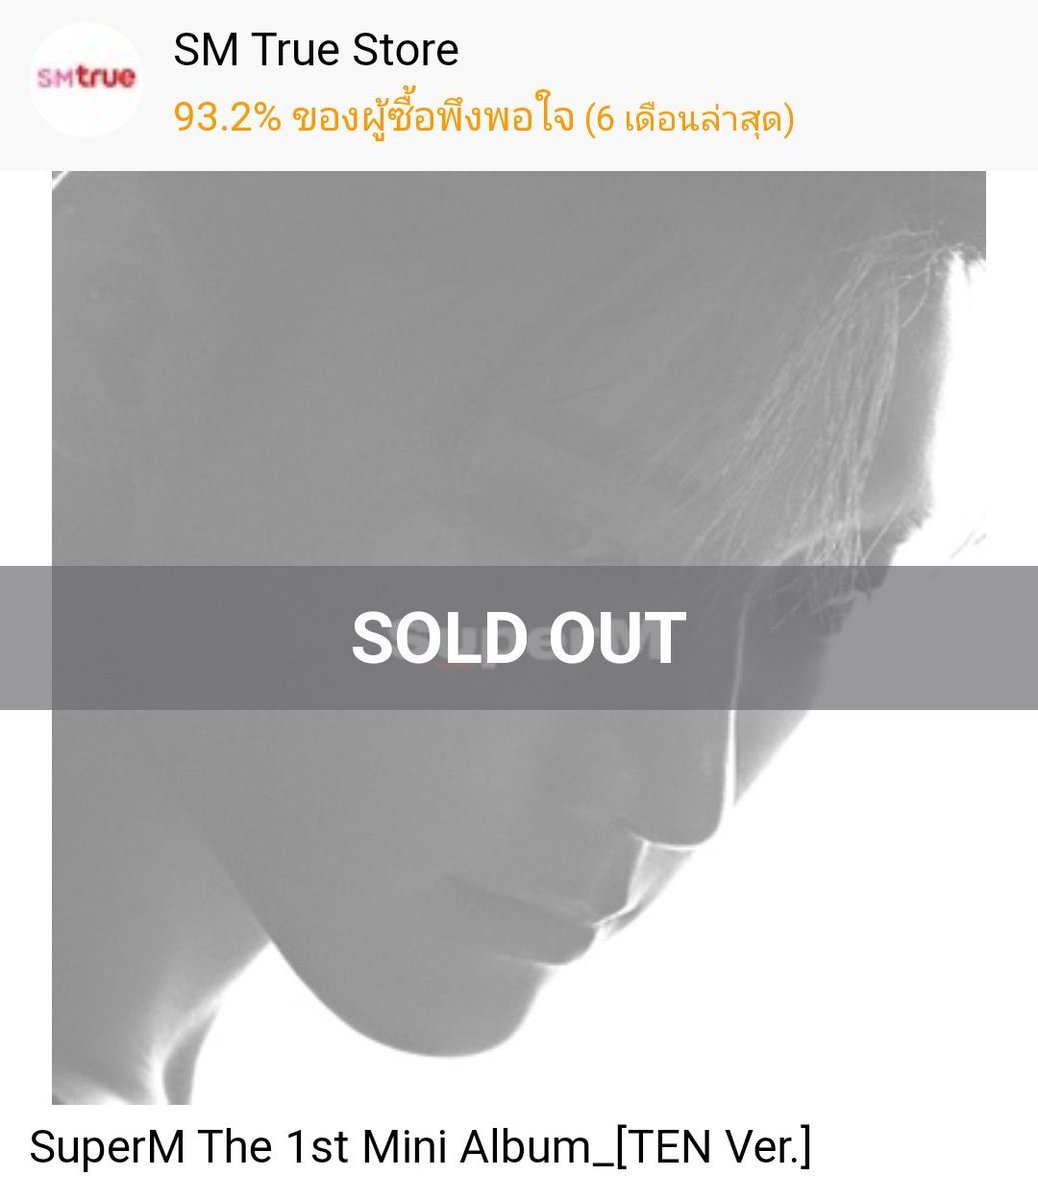 the version of ten getting sold out on SMTrue store and Shopee Thailand